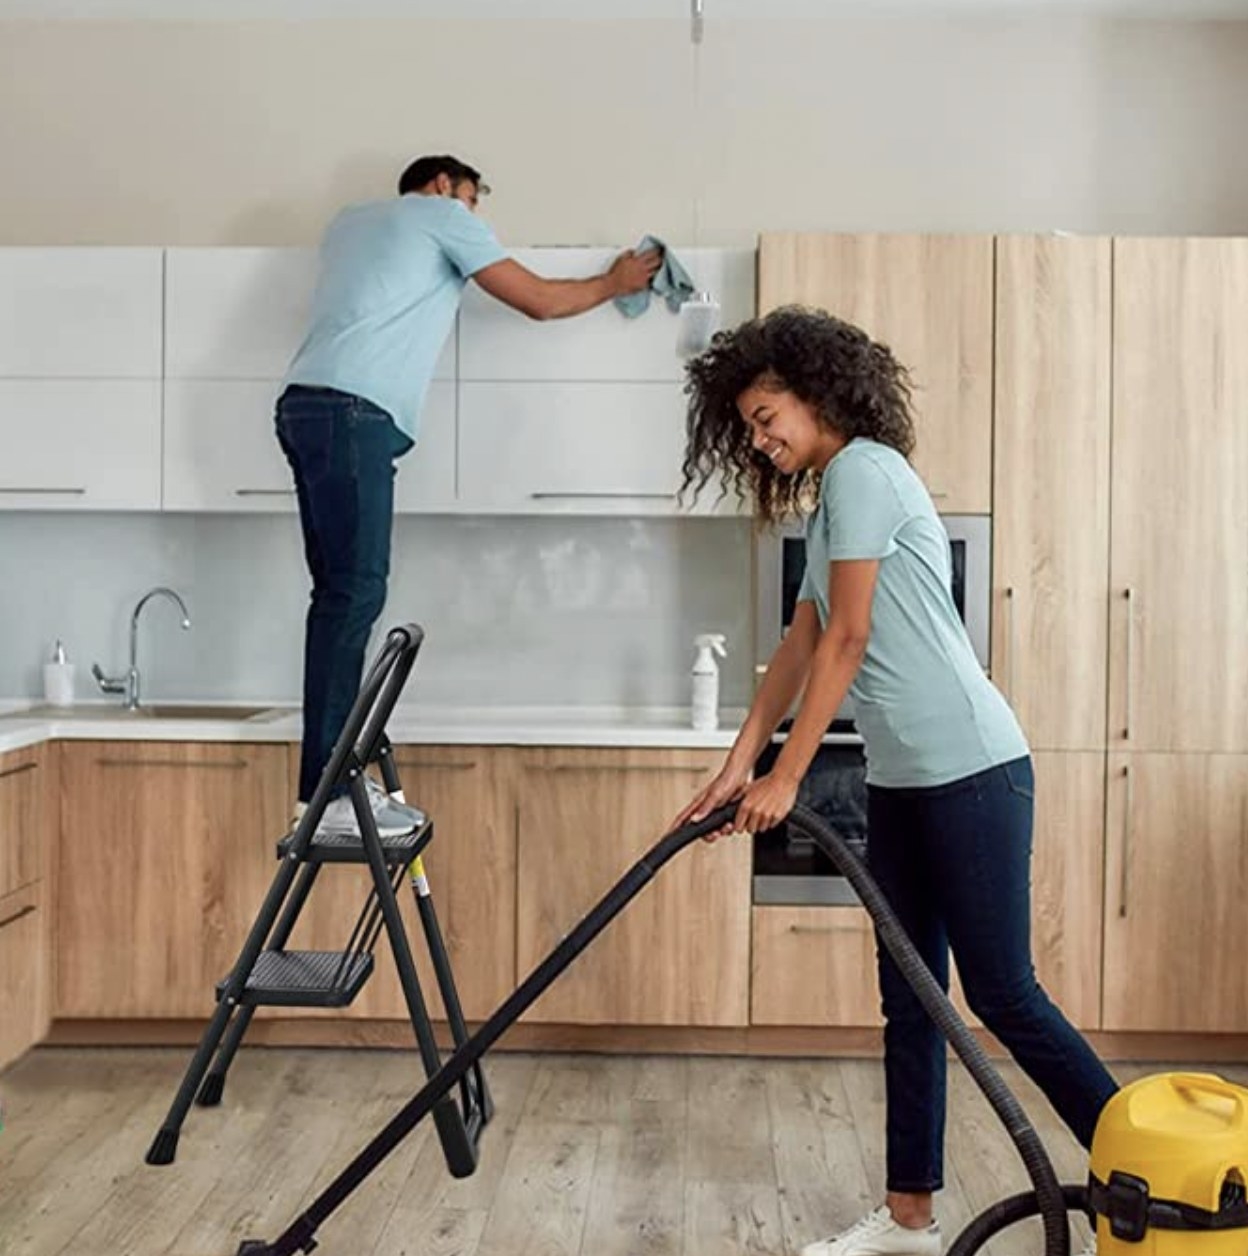 A man on the 2-step ladder in the kitchen with a woman cleaning floors